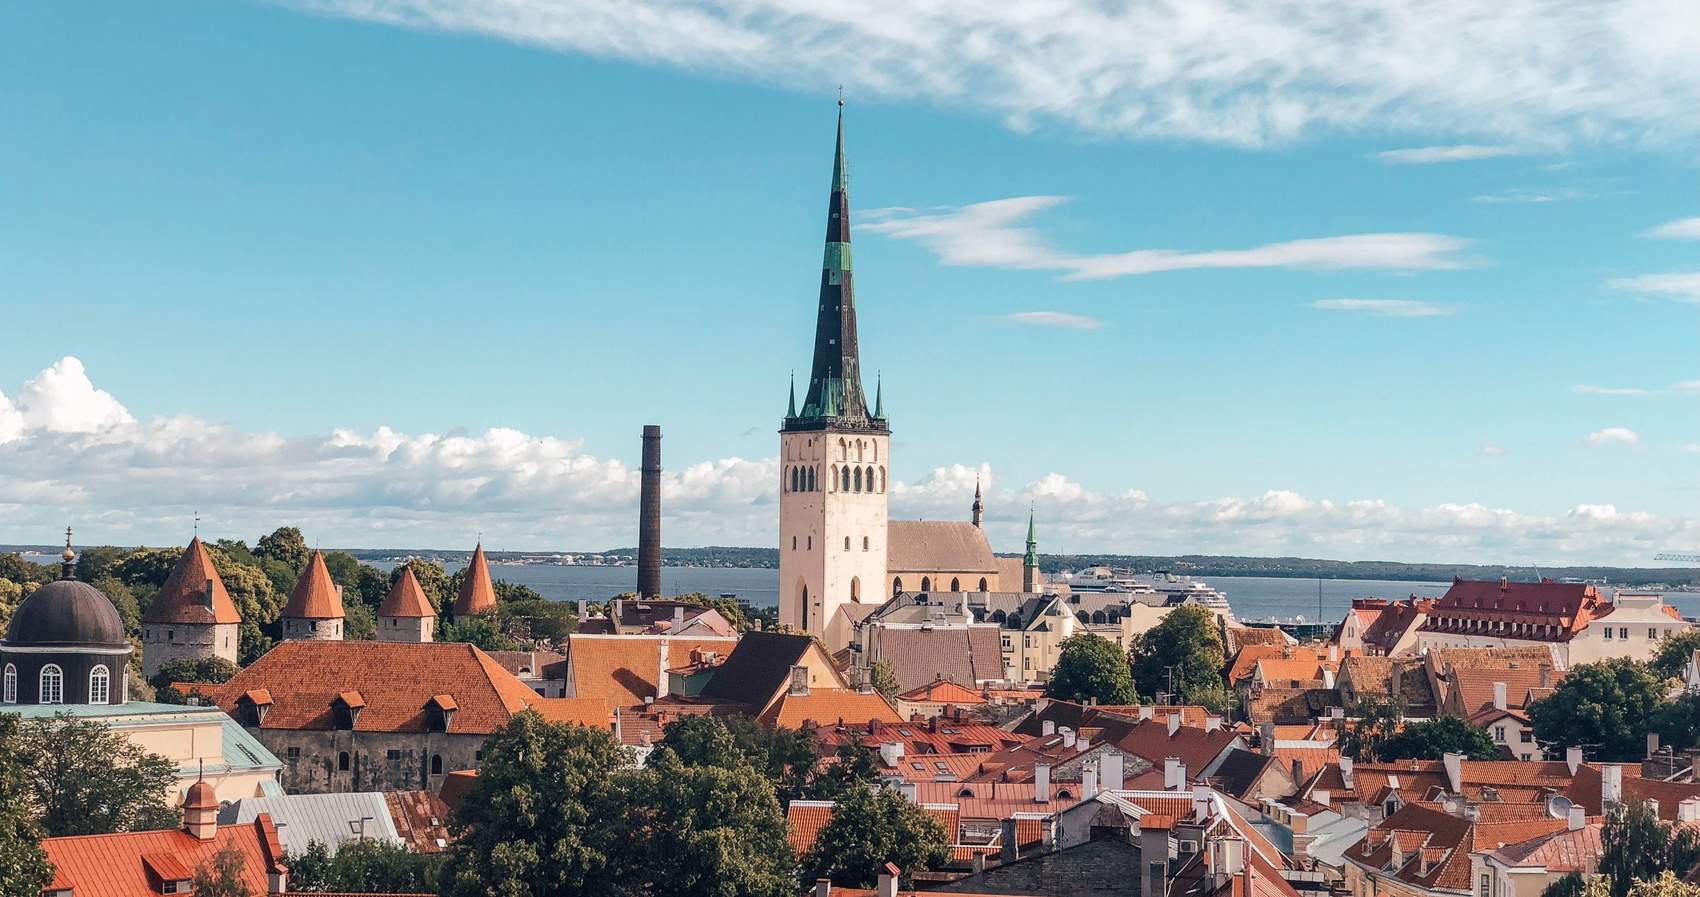 St. Olaf church tower and the aerial view of the Old Town of Tallinn, Estonia Photo: Kadi-Liis Koppel